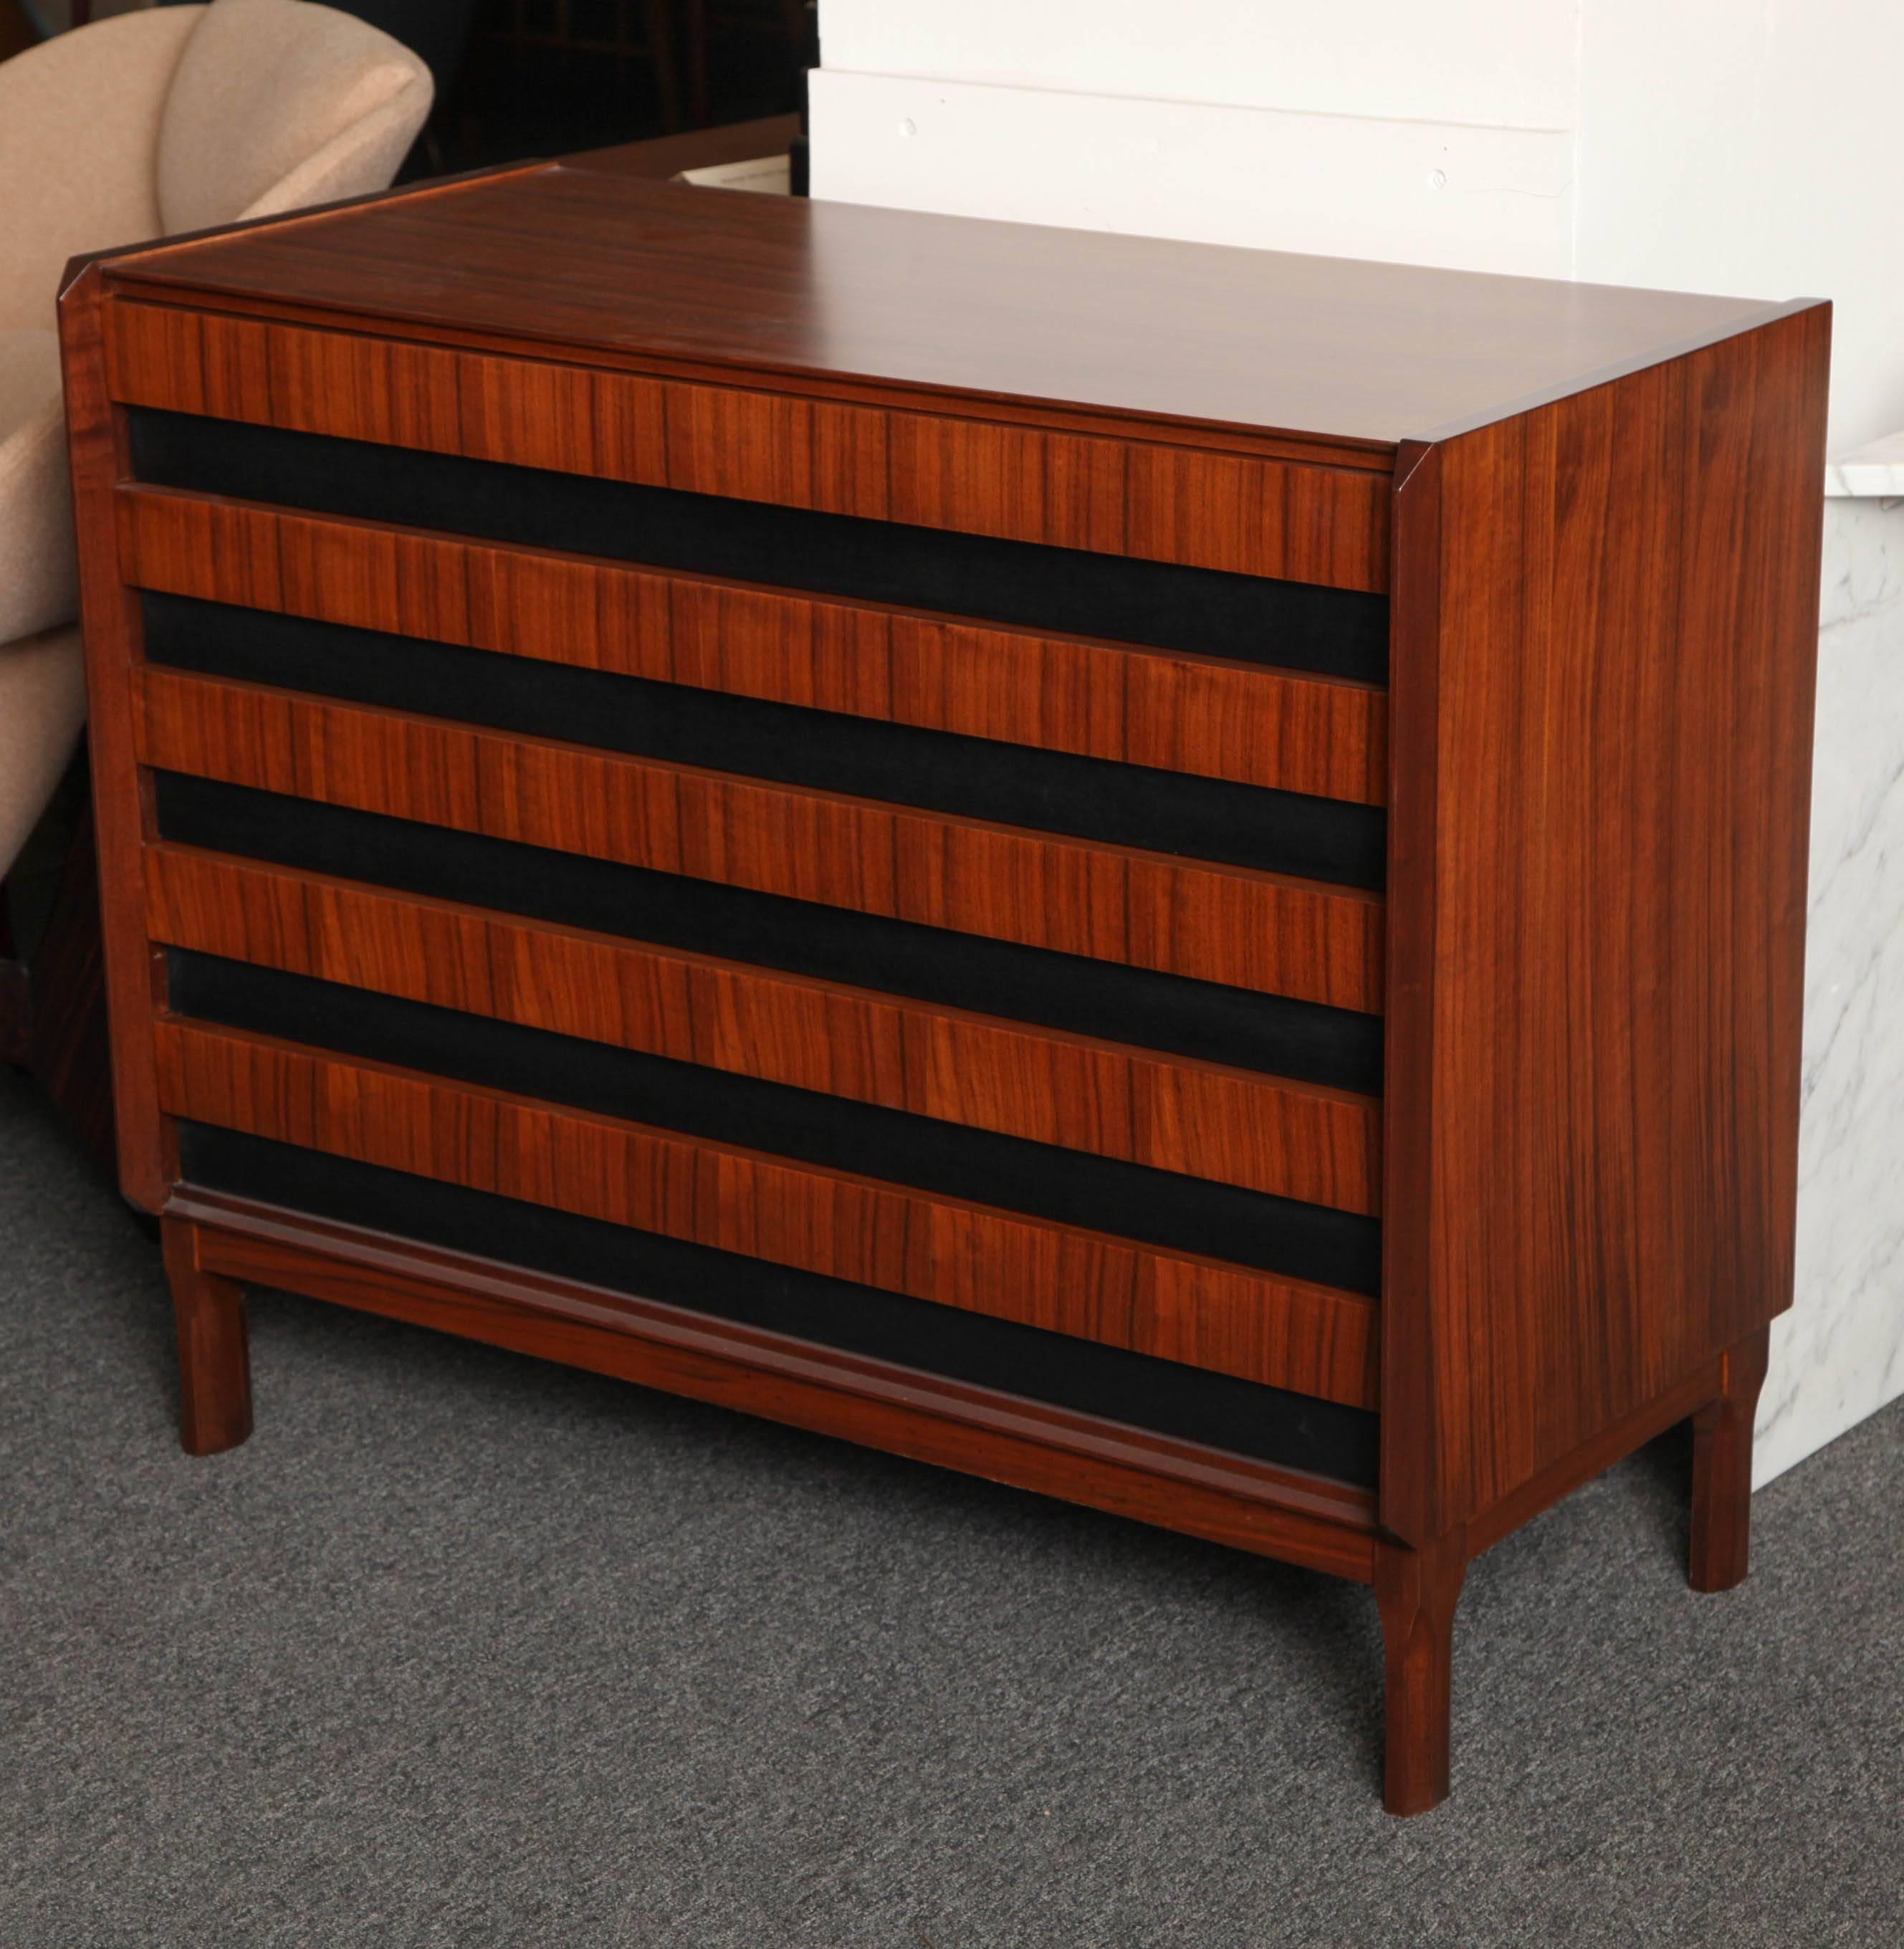 Beautiful five-drawer rosewood dresser designed by Dassi made in Milan, 1955, nice ebonized detailing on drawers, great quality and size.